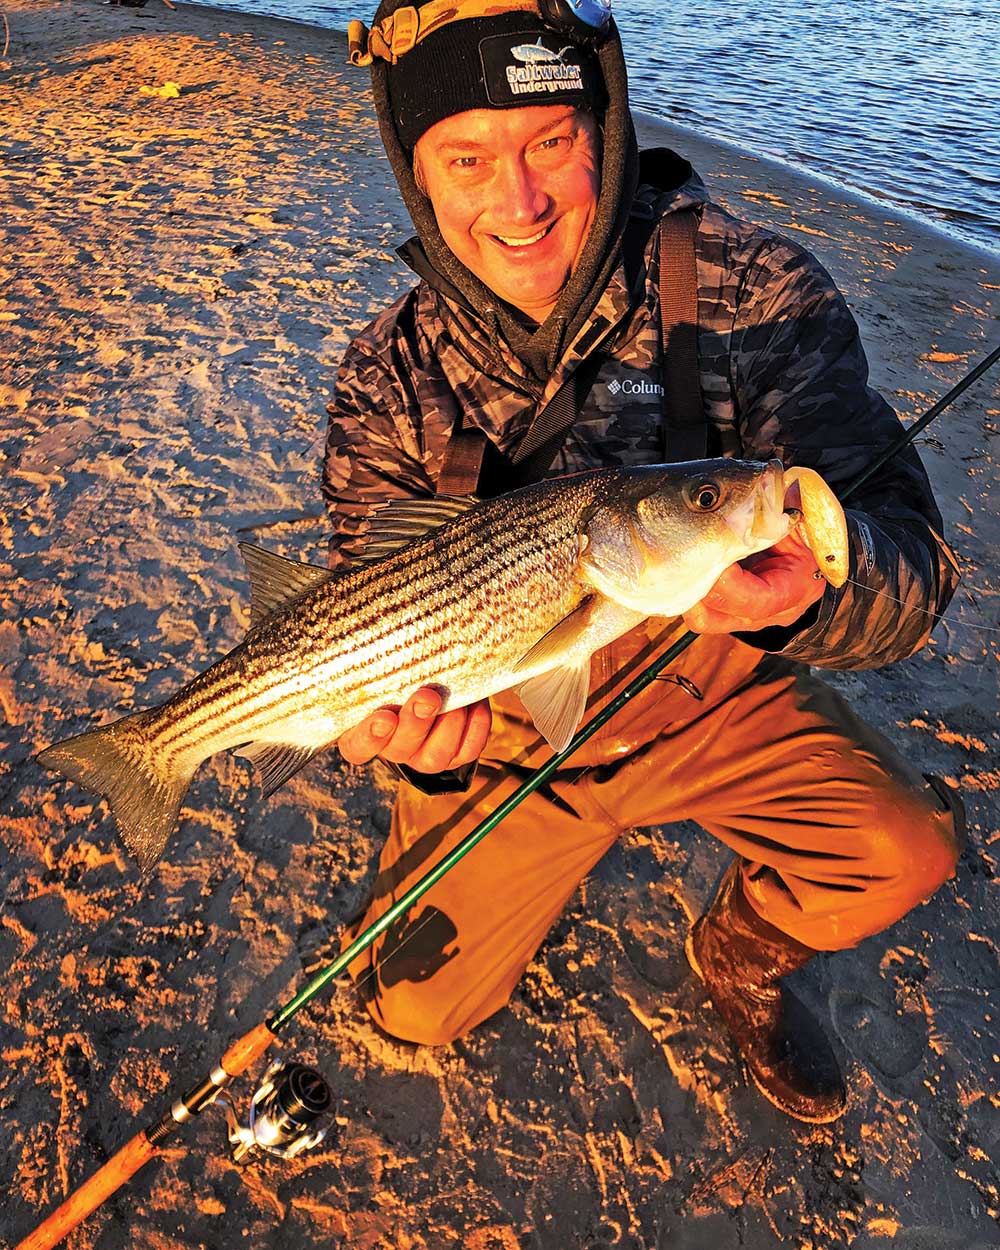 While early season stripers are typically slow to feed